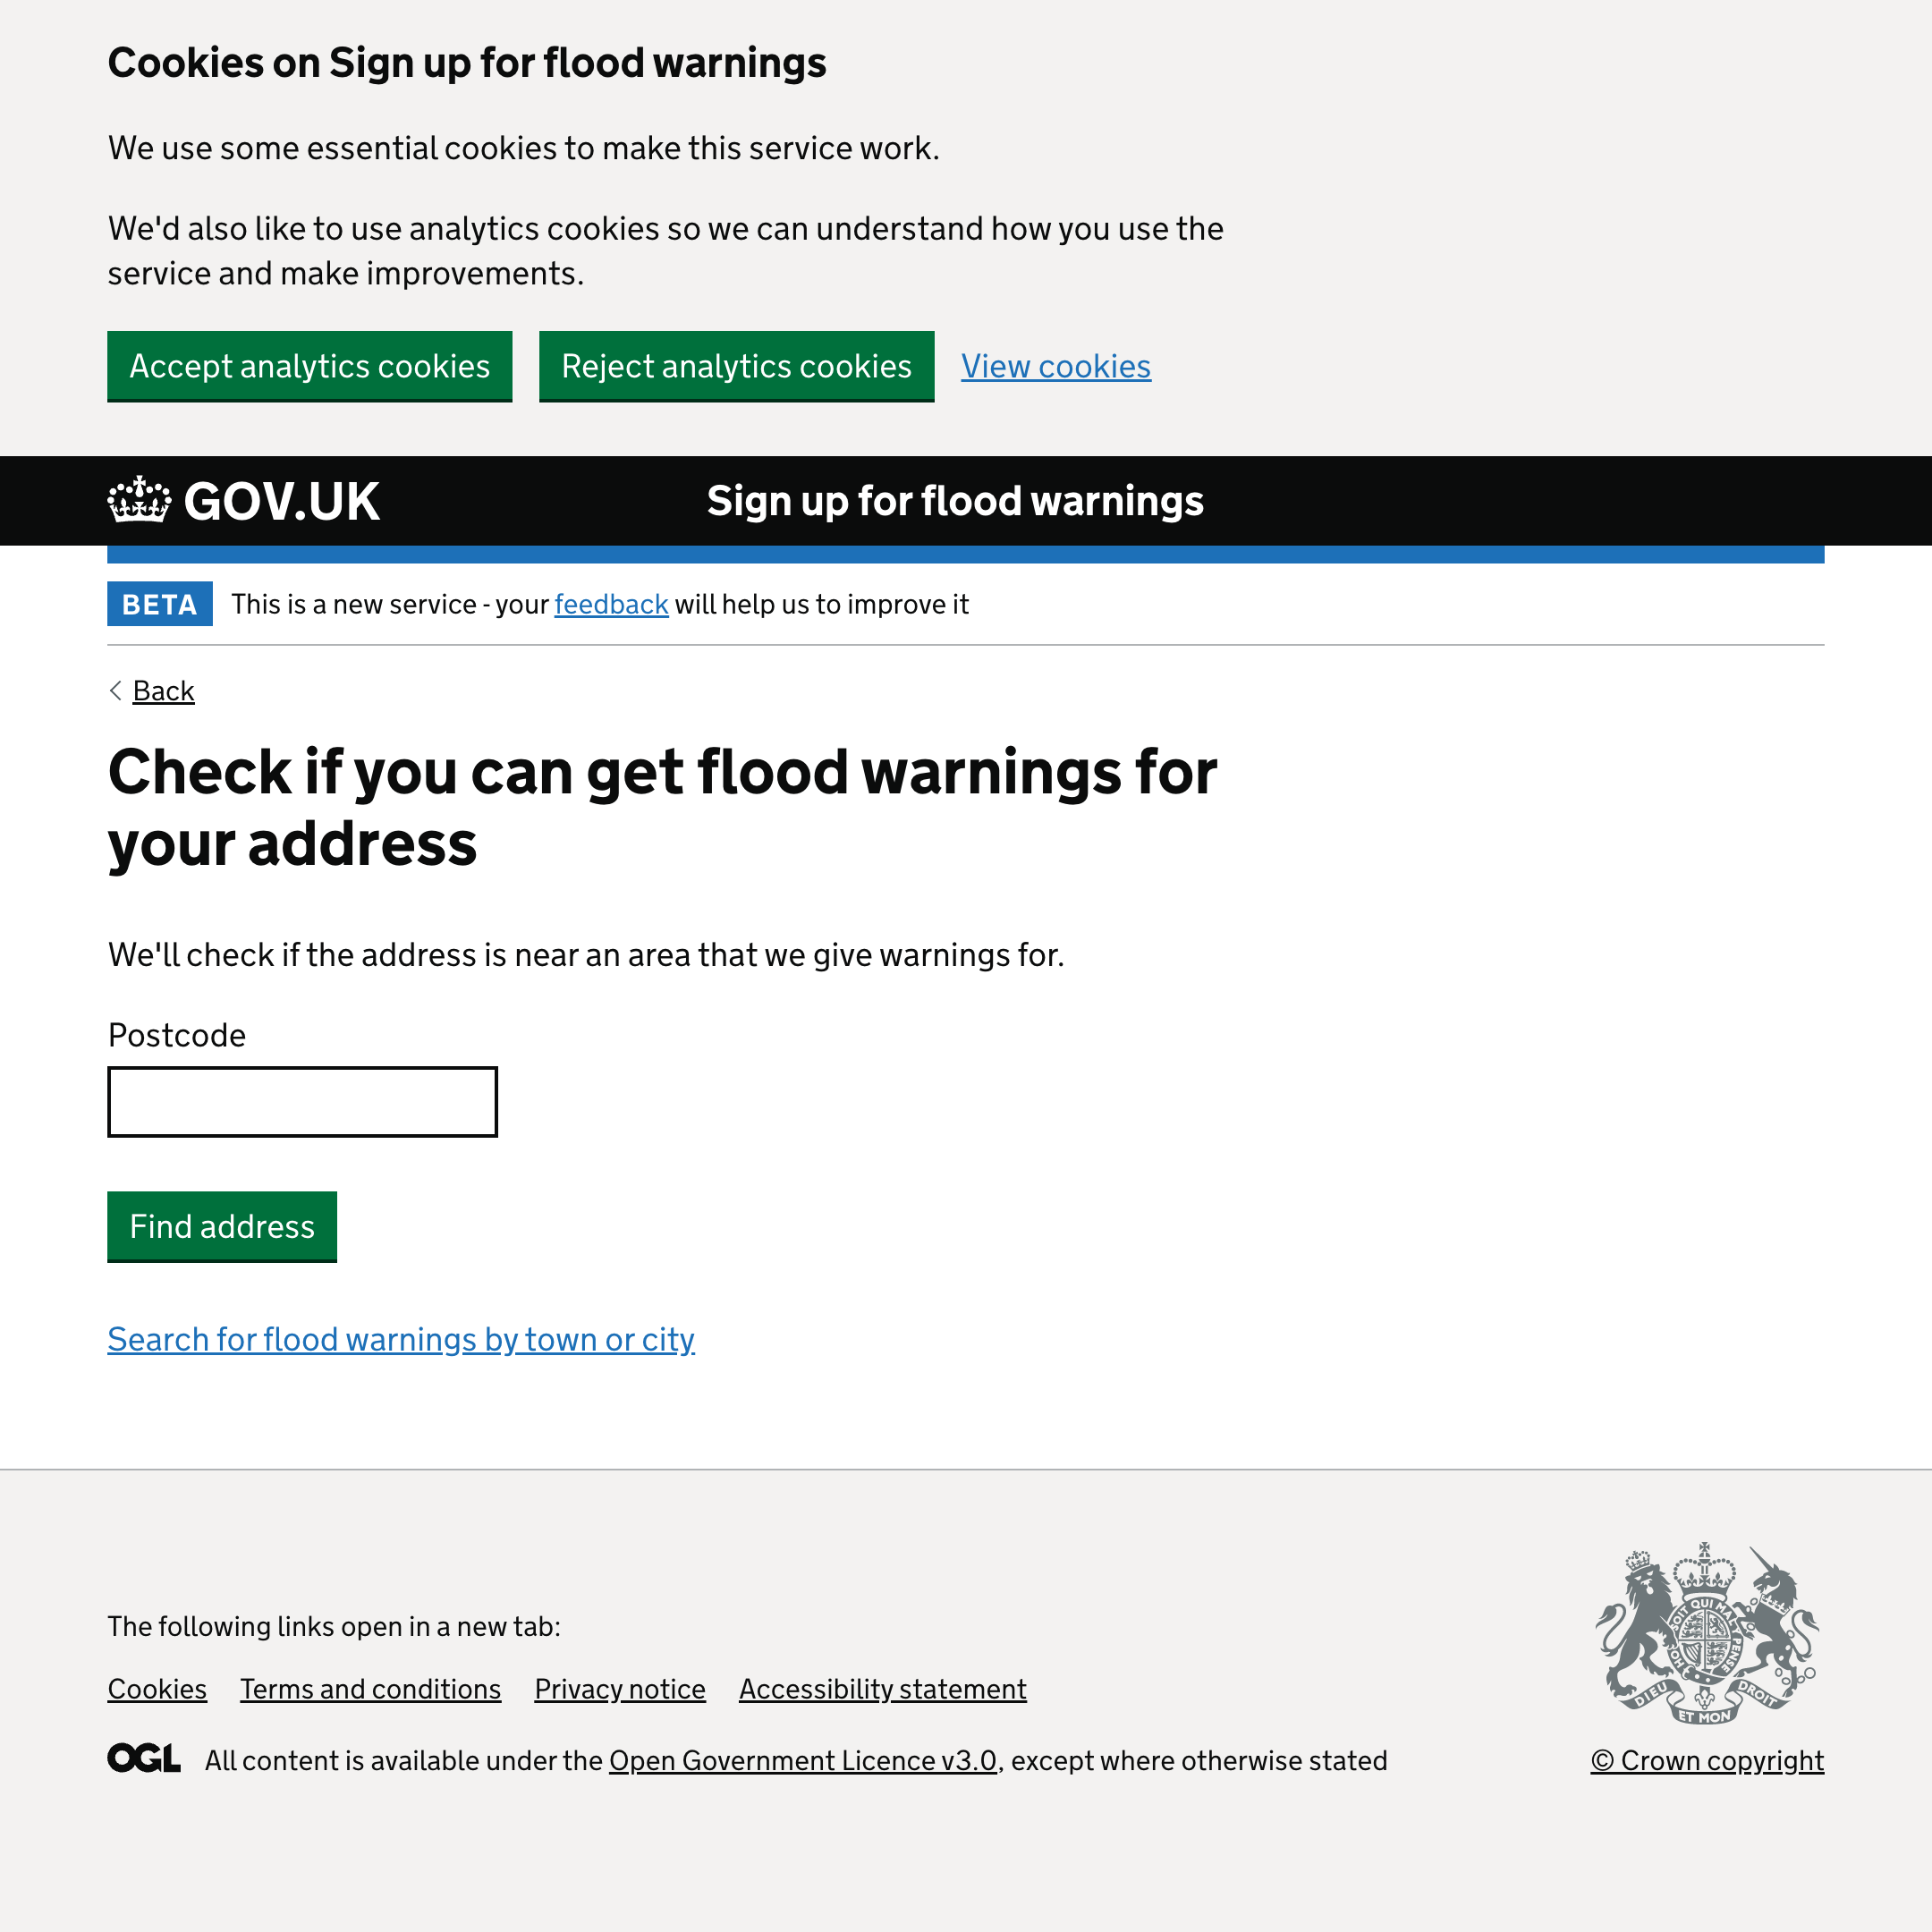 Sign up for flood warnings